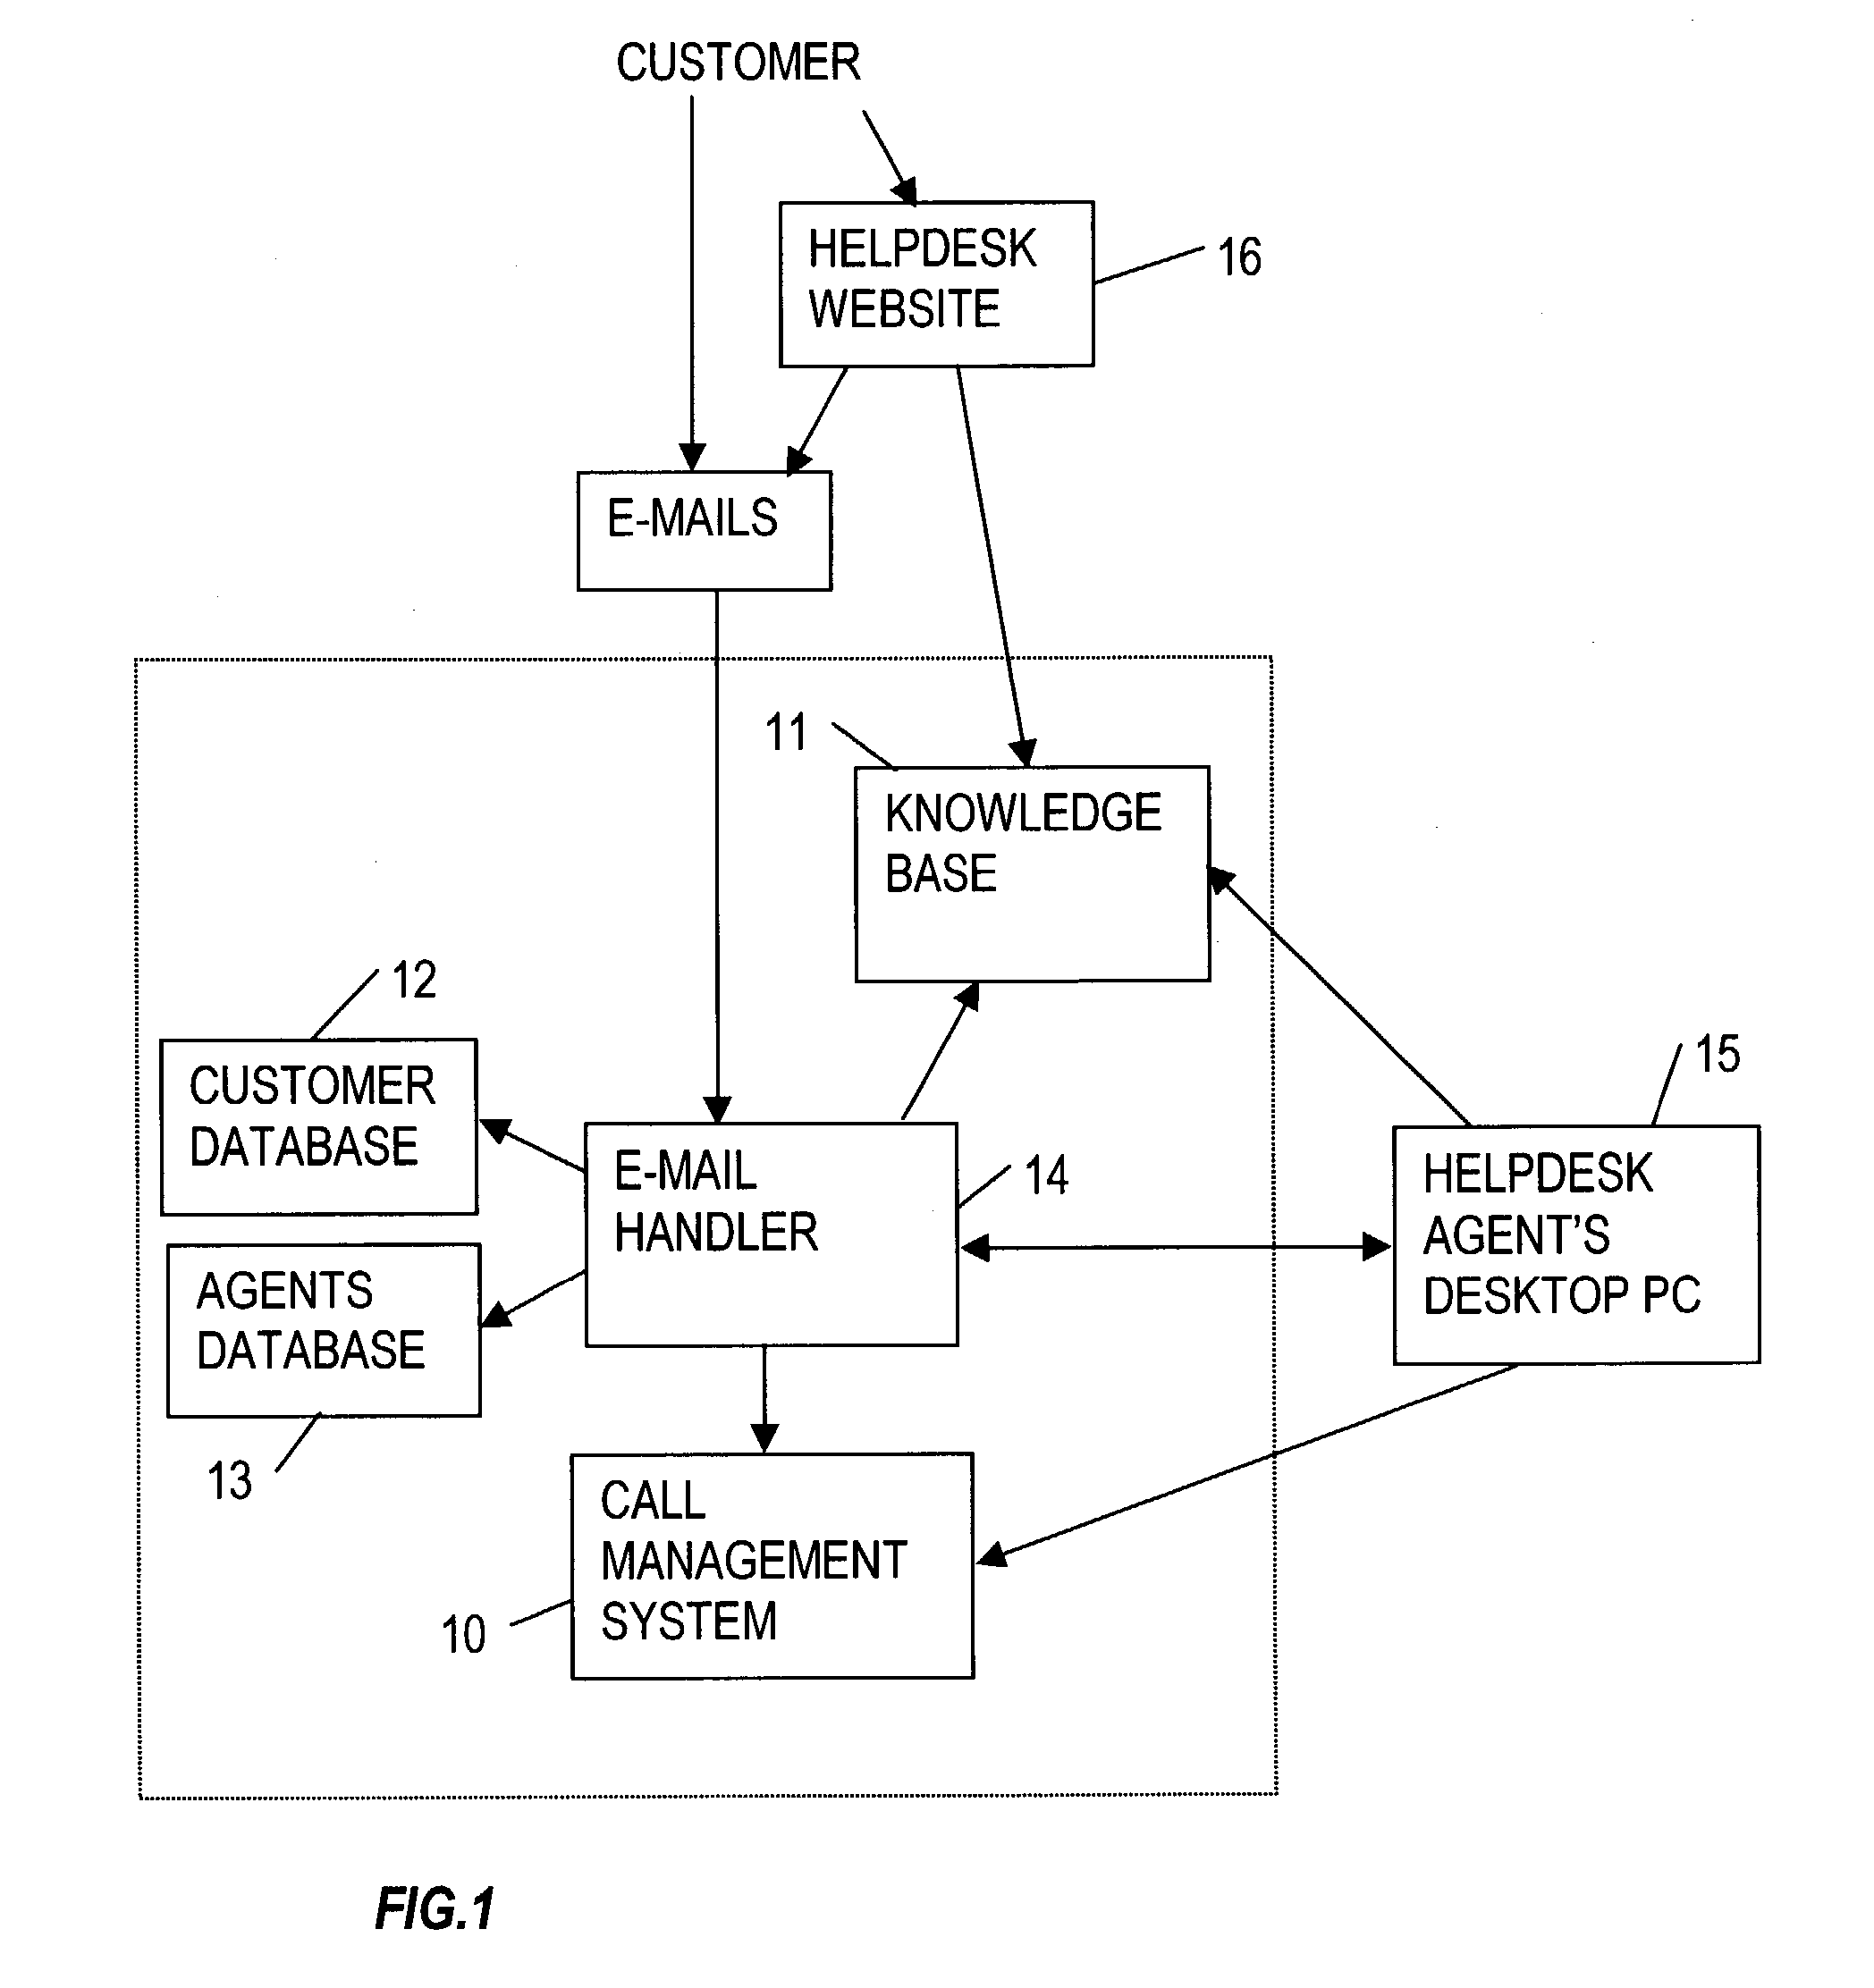 Method and apparatus for providing a helpdesk service